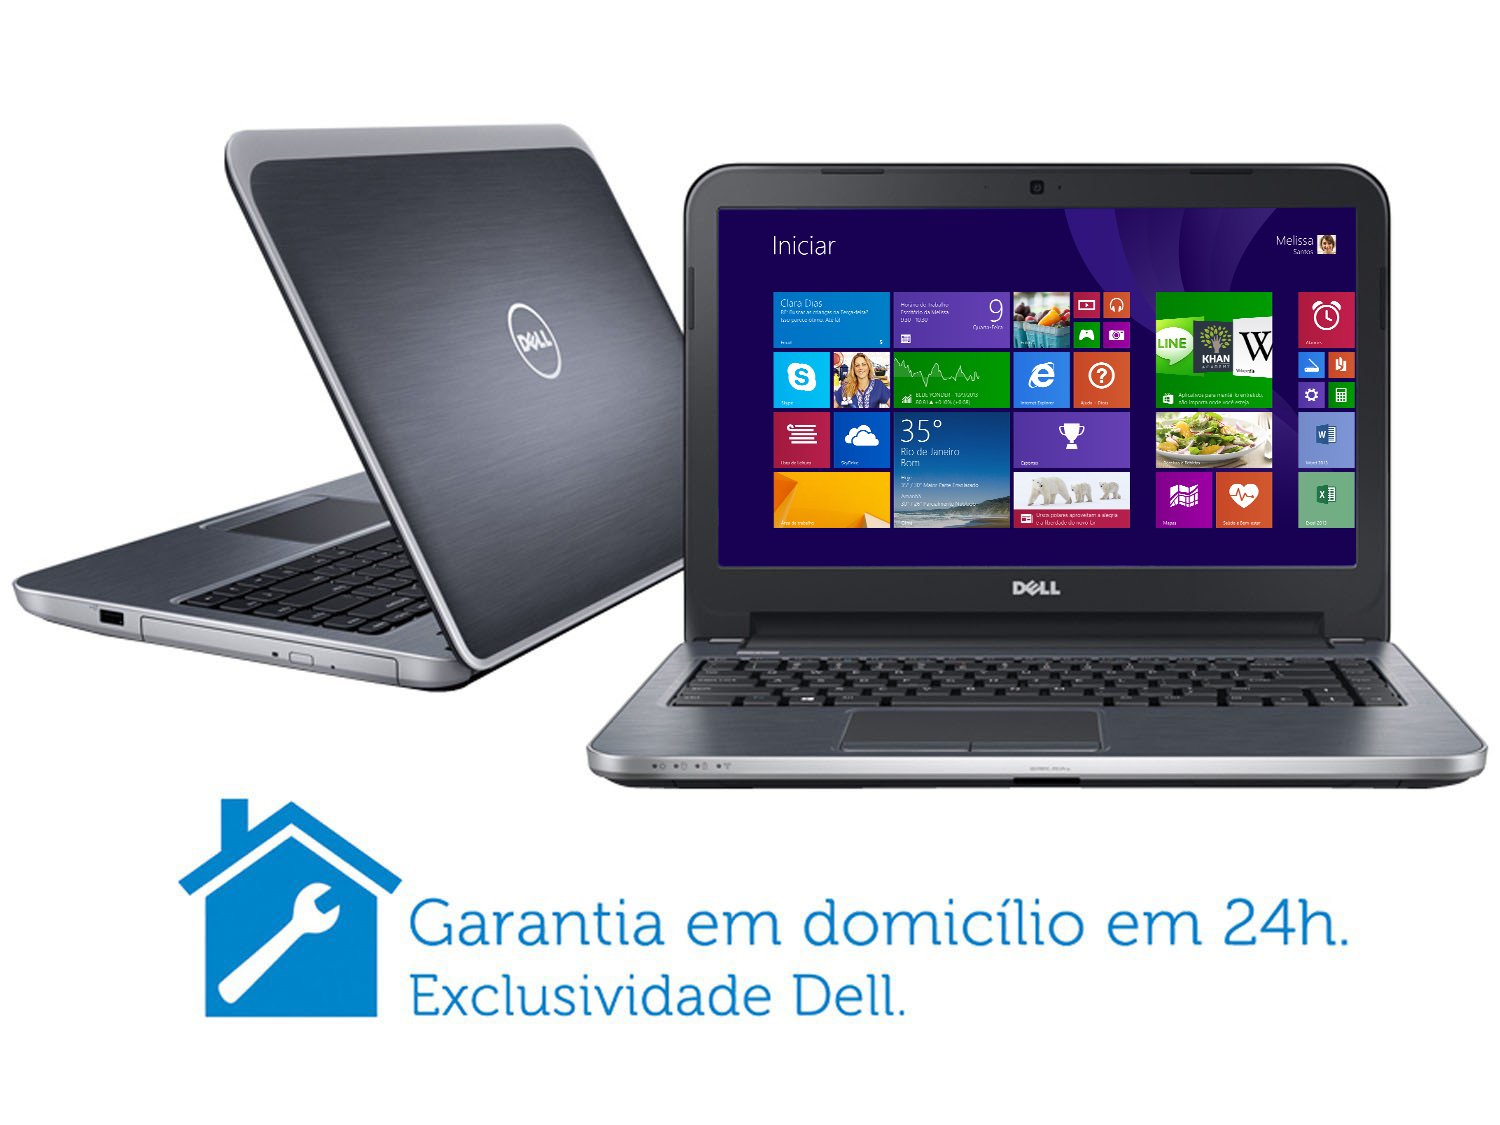 DELL Ins14R 5437 Core I5-4200 Ram 4G HDD 500 14. 1inch Giashock!